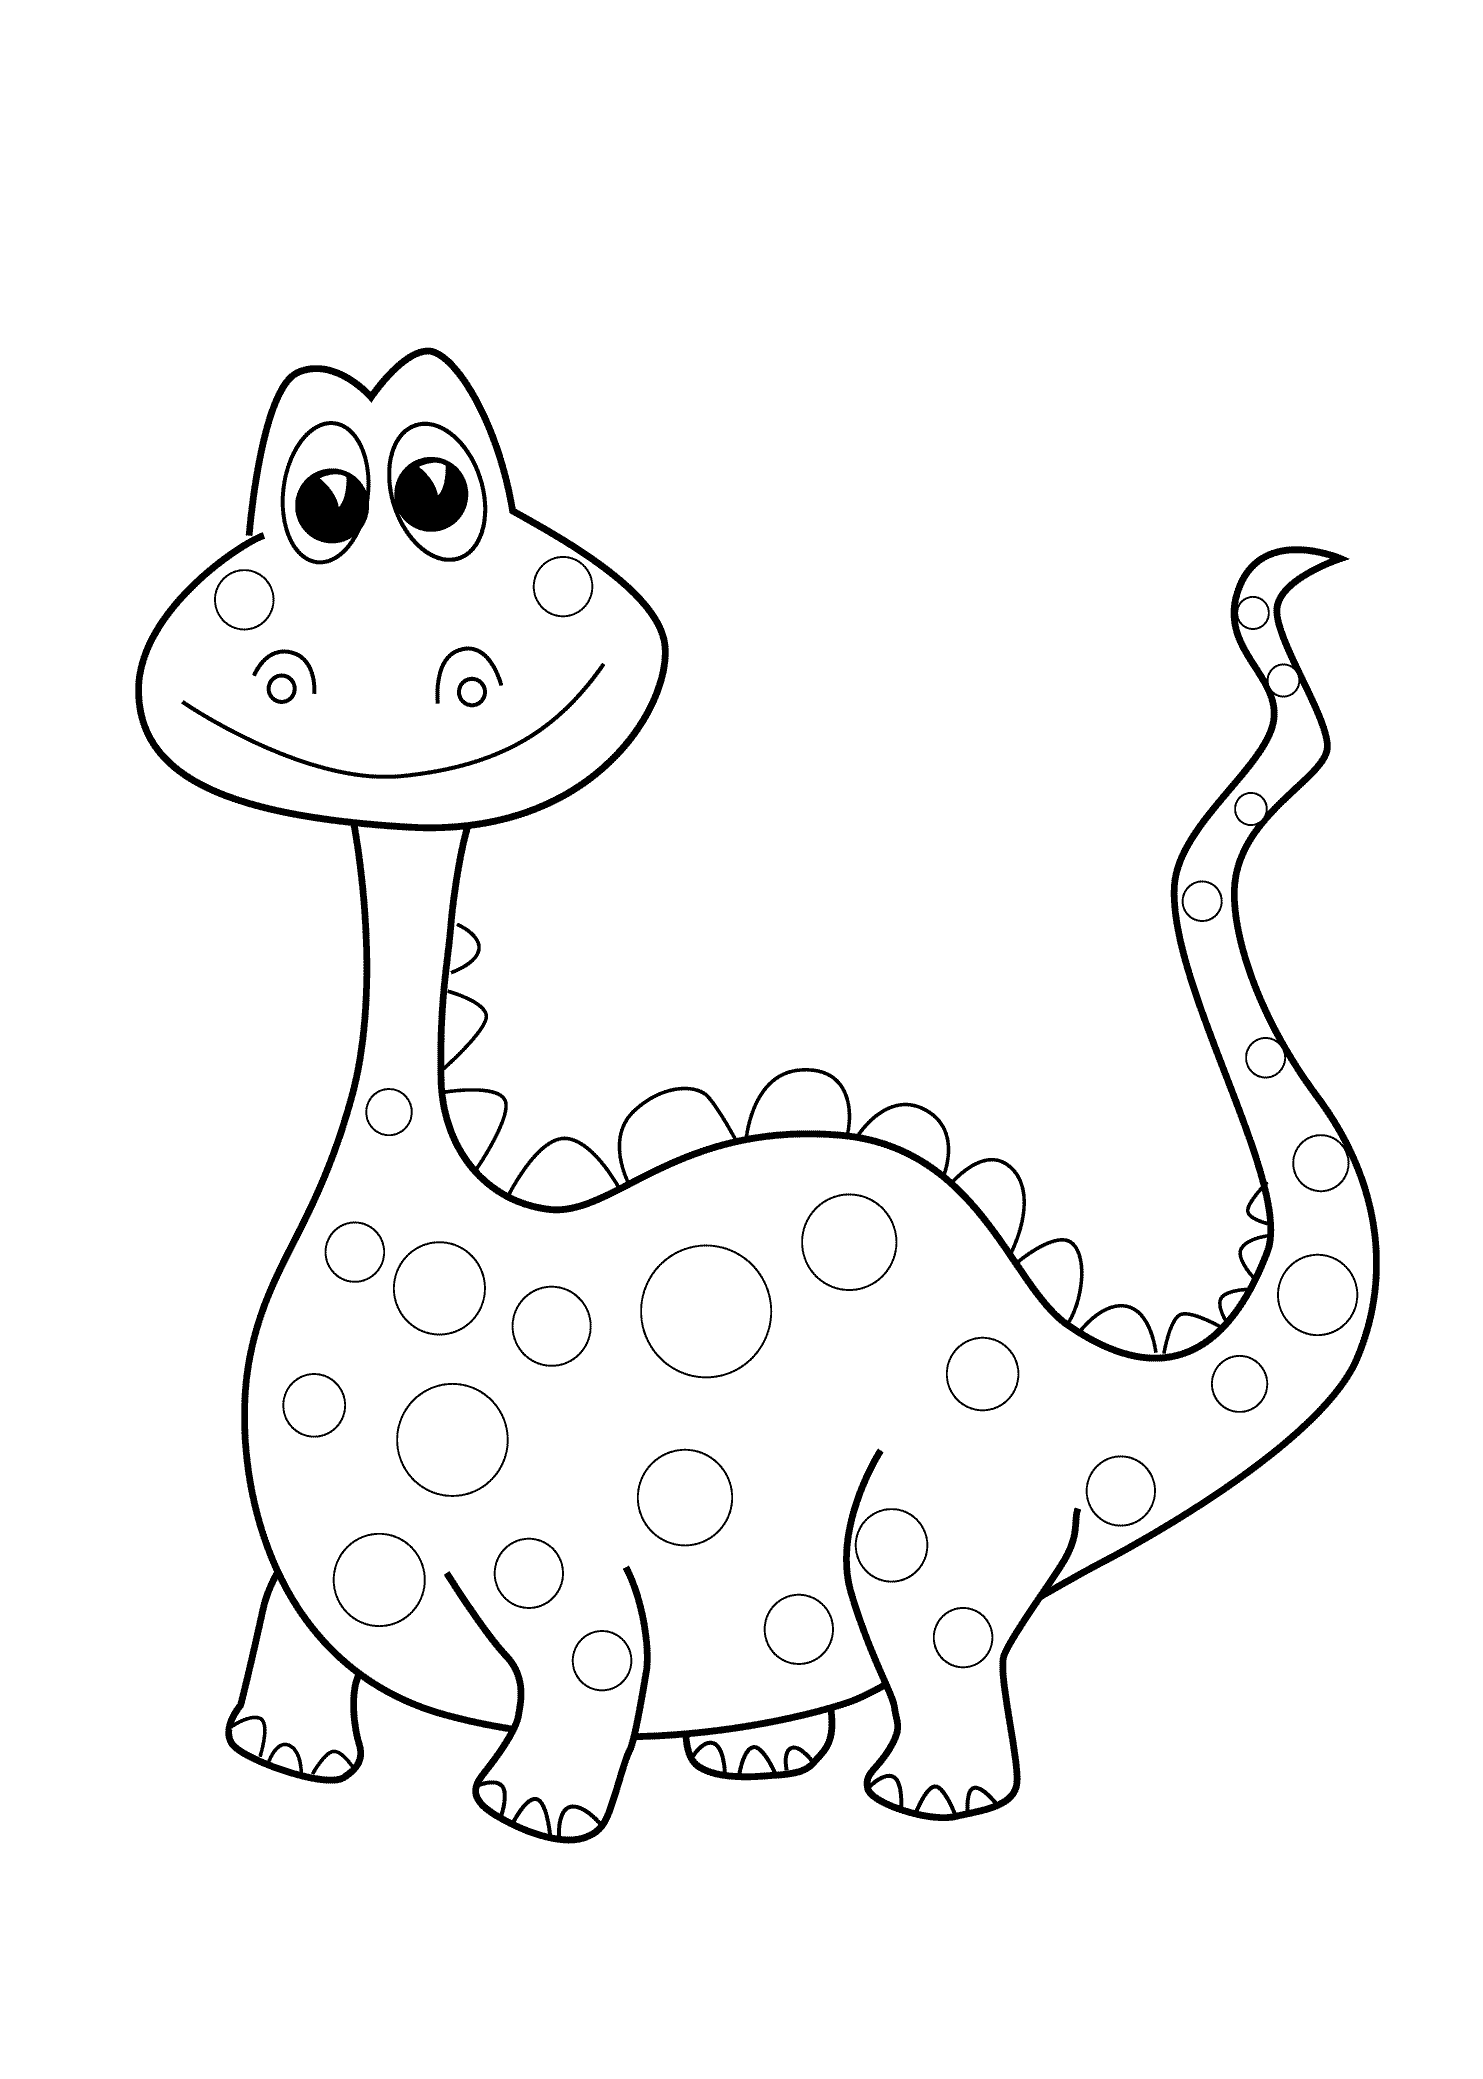 Simple Dinosaur Coloring Pages For Kids